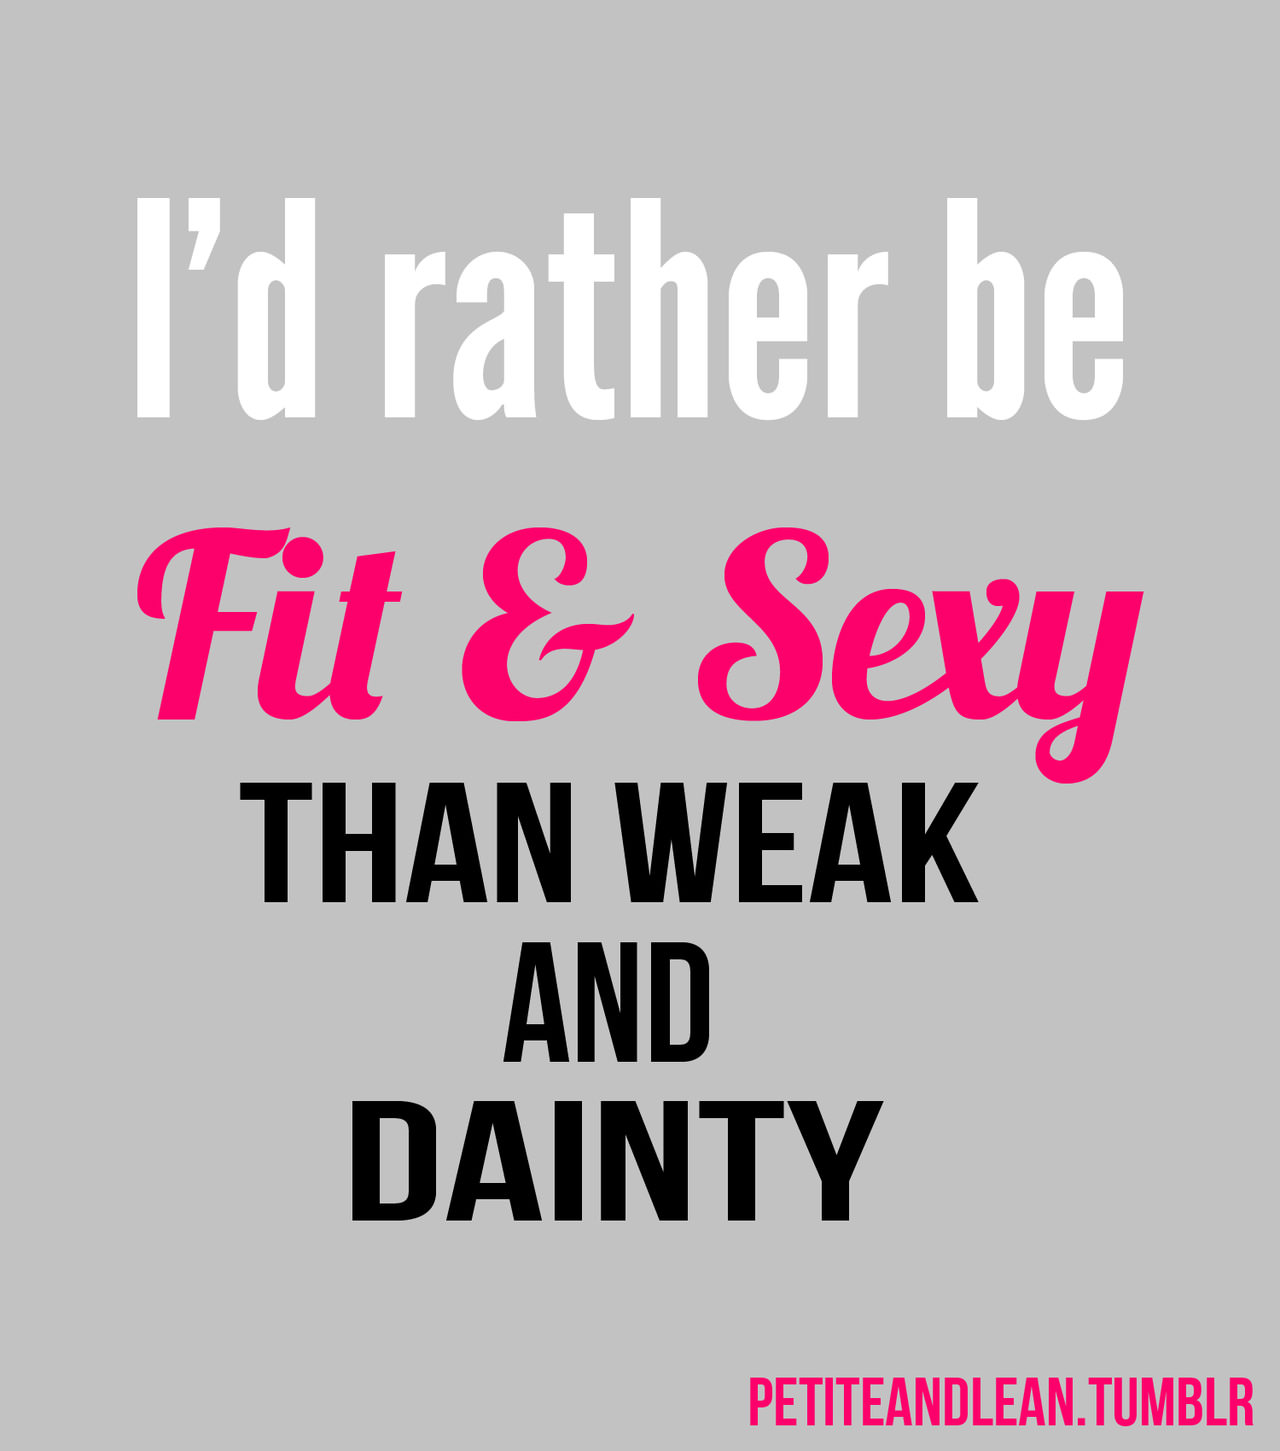 Runner Things #373: I'd rather be fit & sexy than weak and dainty.